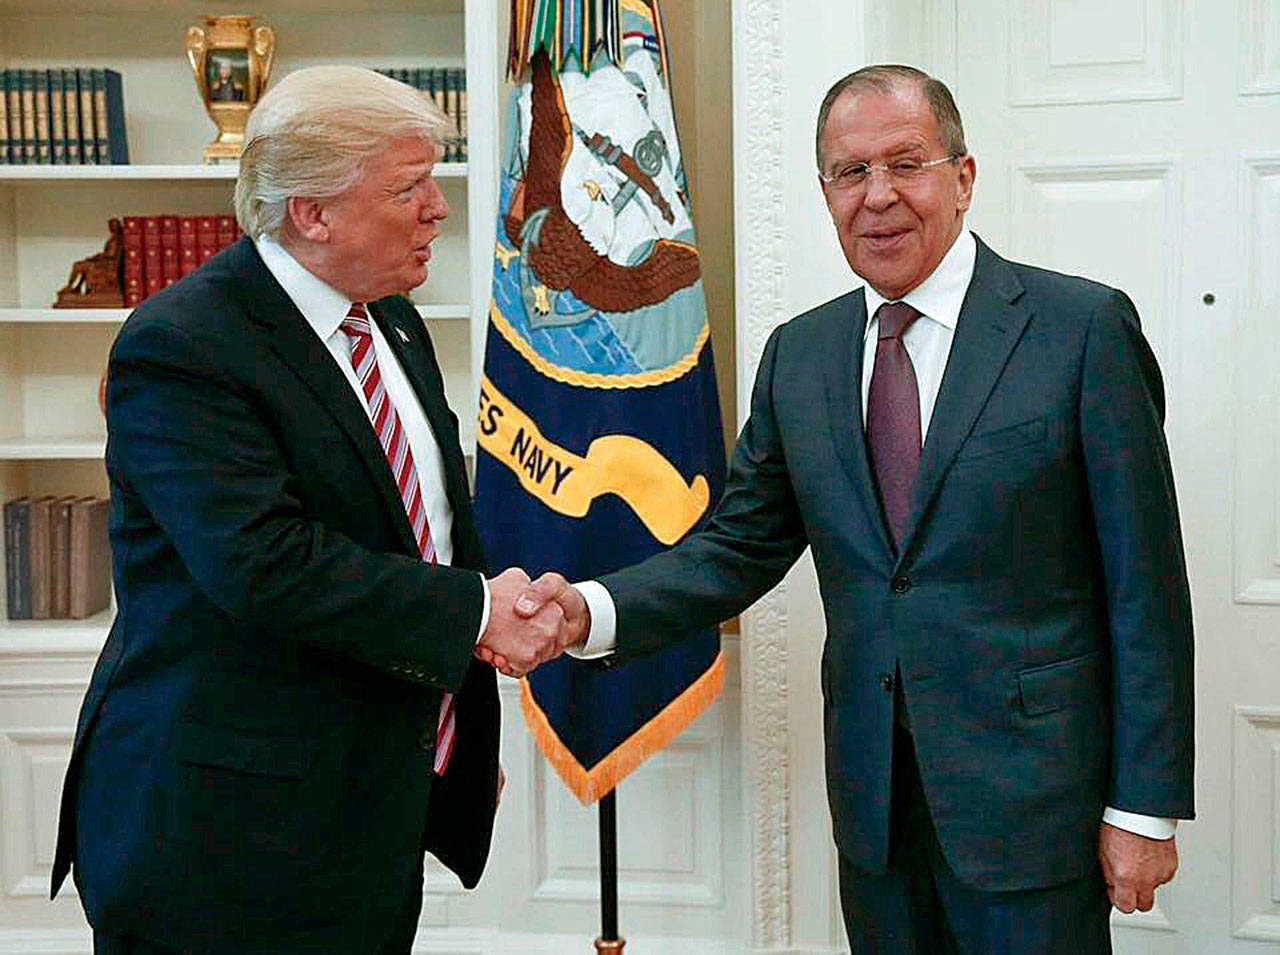 President Donald Trump shakes hands with Russian Foreign Minister Sergey Lavrov in the White House on Wednesday. (Russian Foreign Ministry)